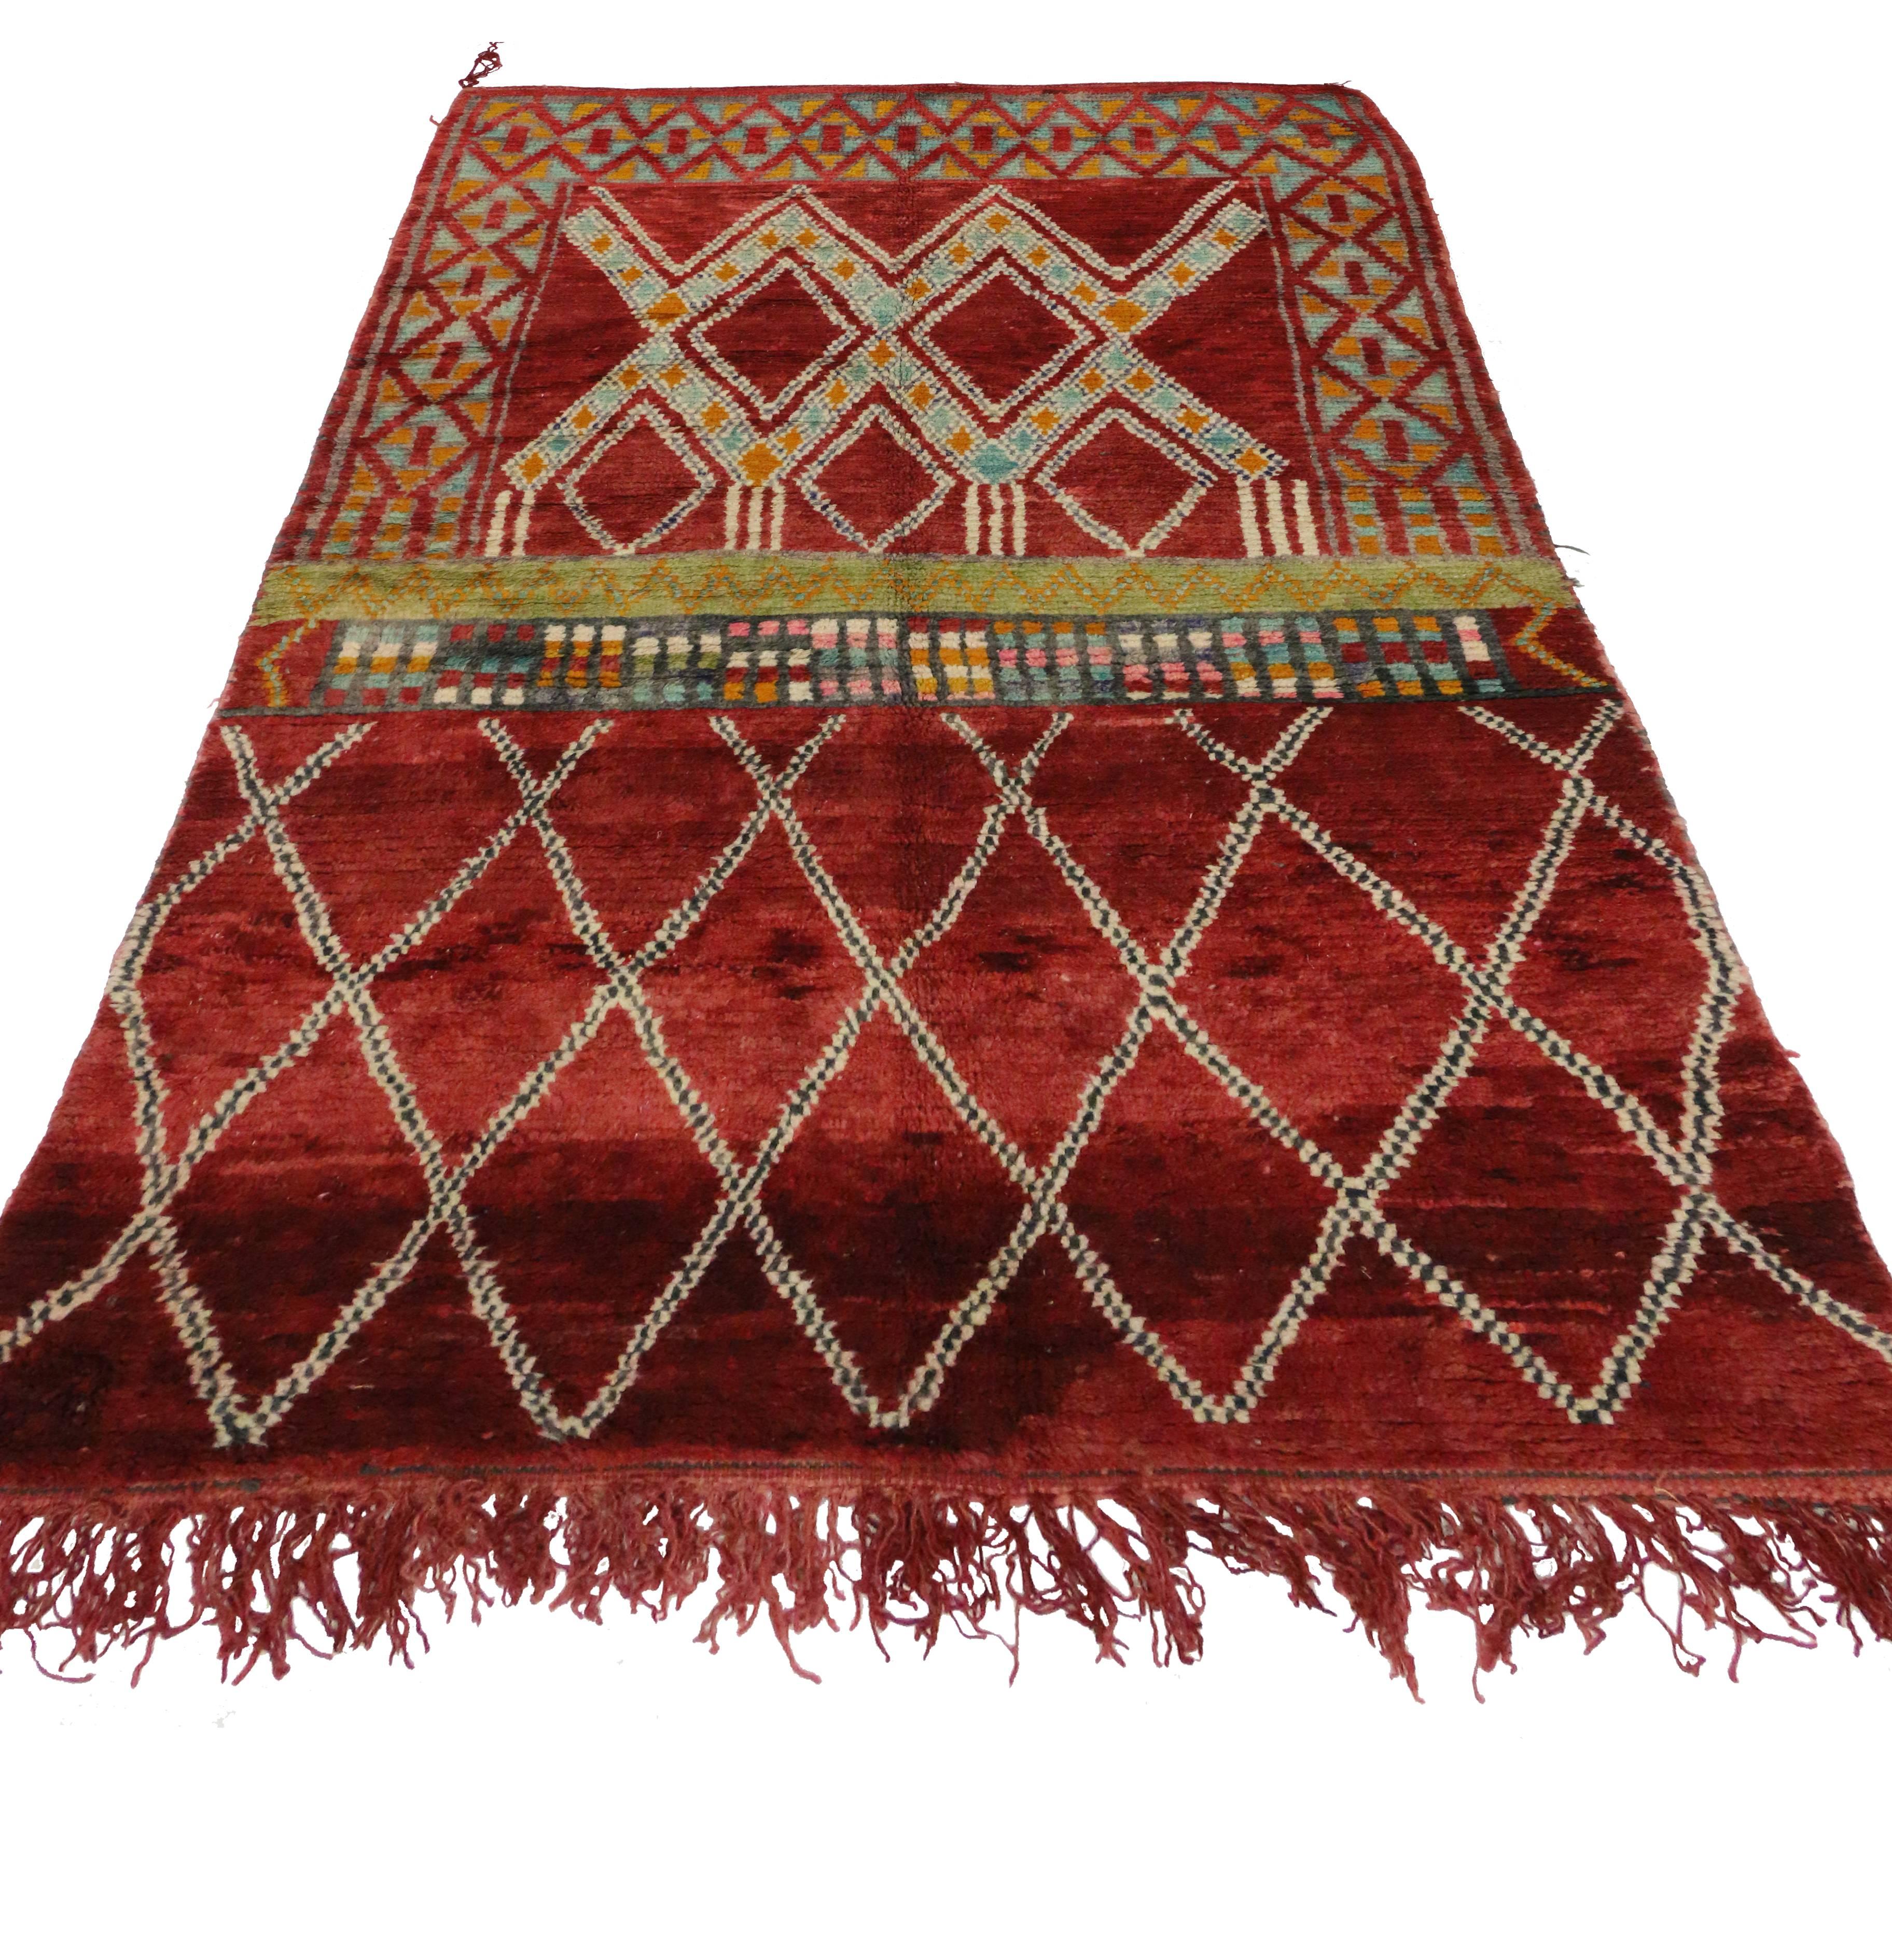 Contemporary Mid-Century Modern Berber Moroccan Rug with Modern Tribal Style